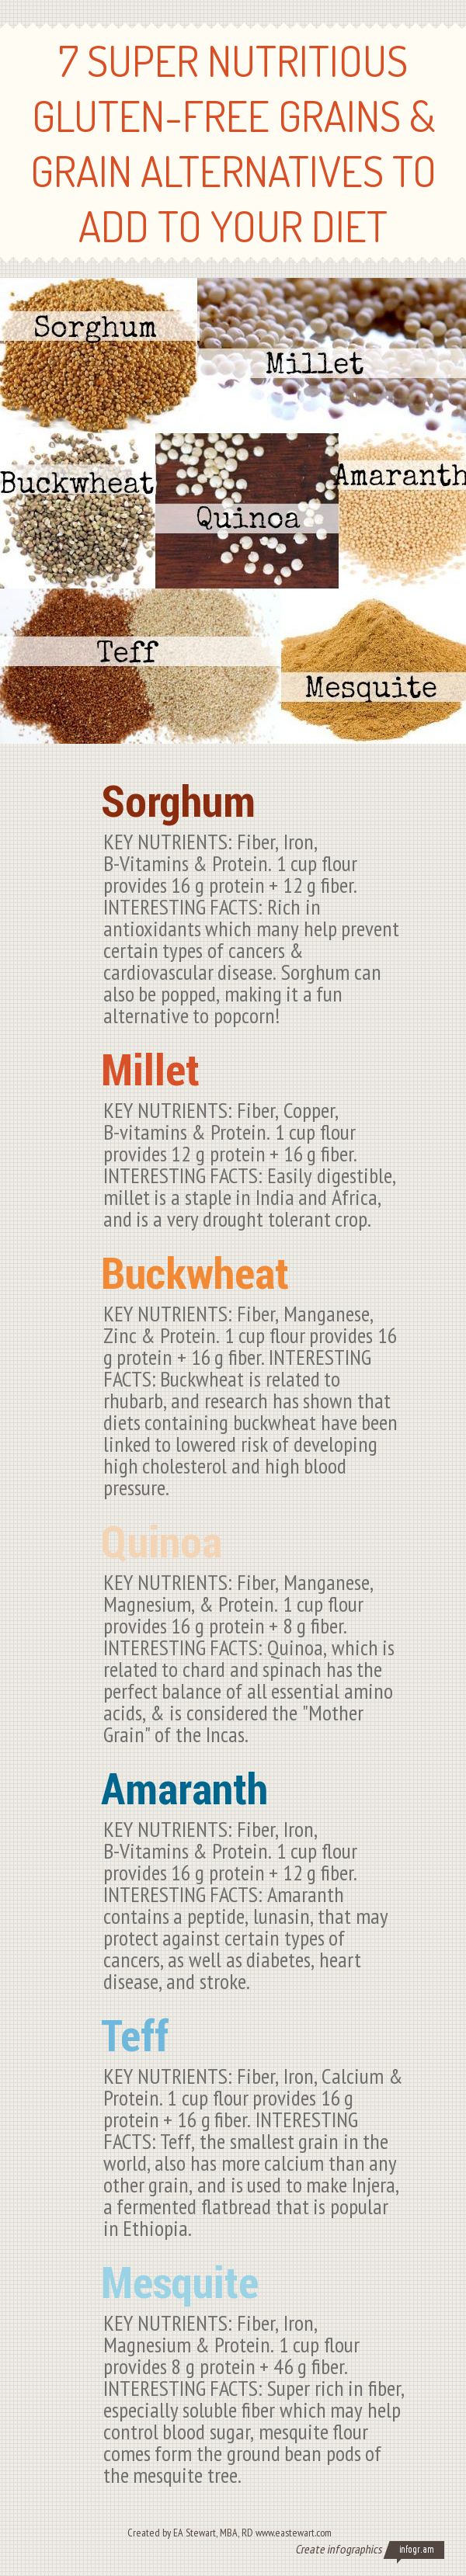 7 Super Nutritious Gluten-Free Grains For Your Healthy Diet Infographic